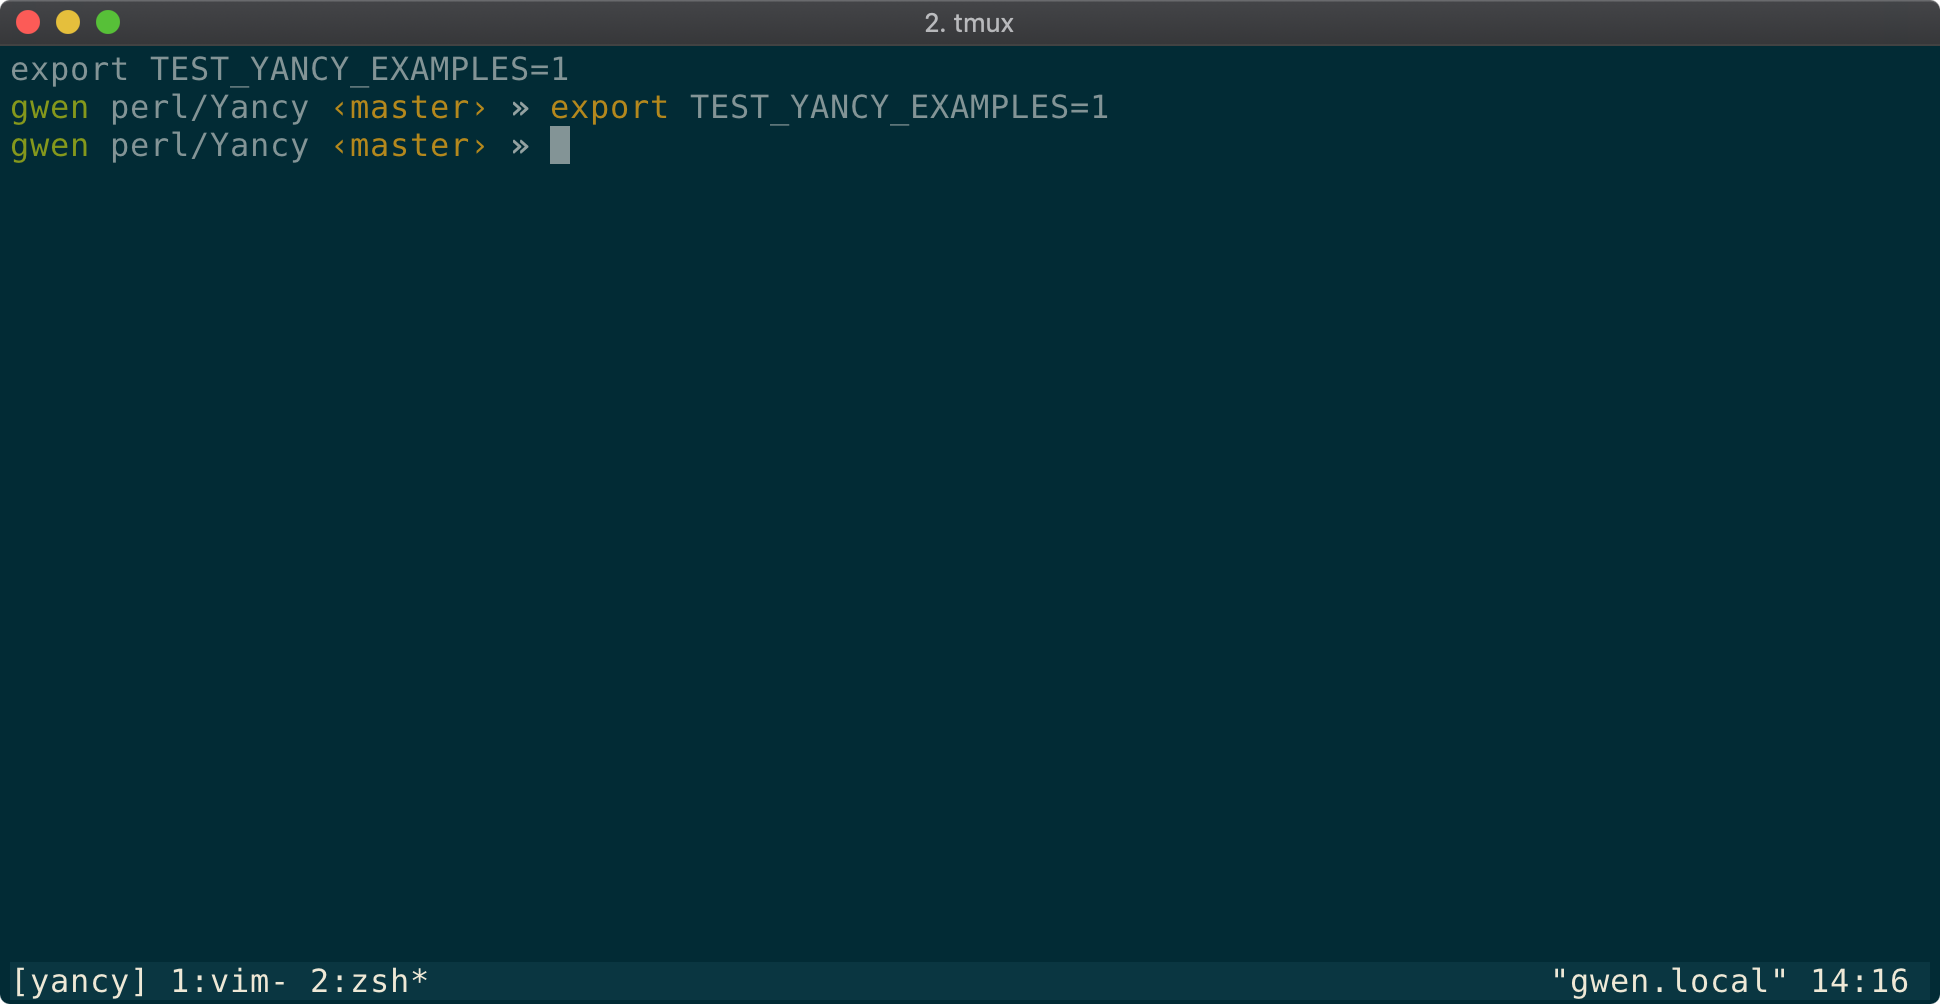 A Tmux window showing a shell with TEST_YANCY_EXAMPLES environment
variable set